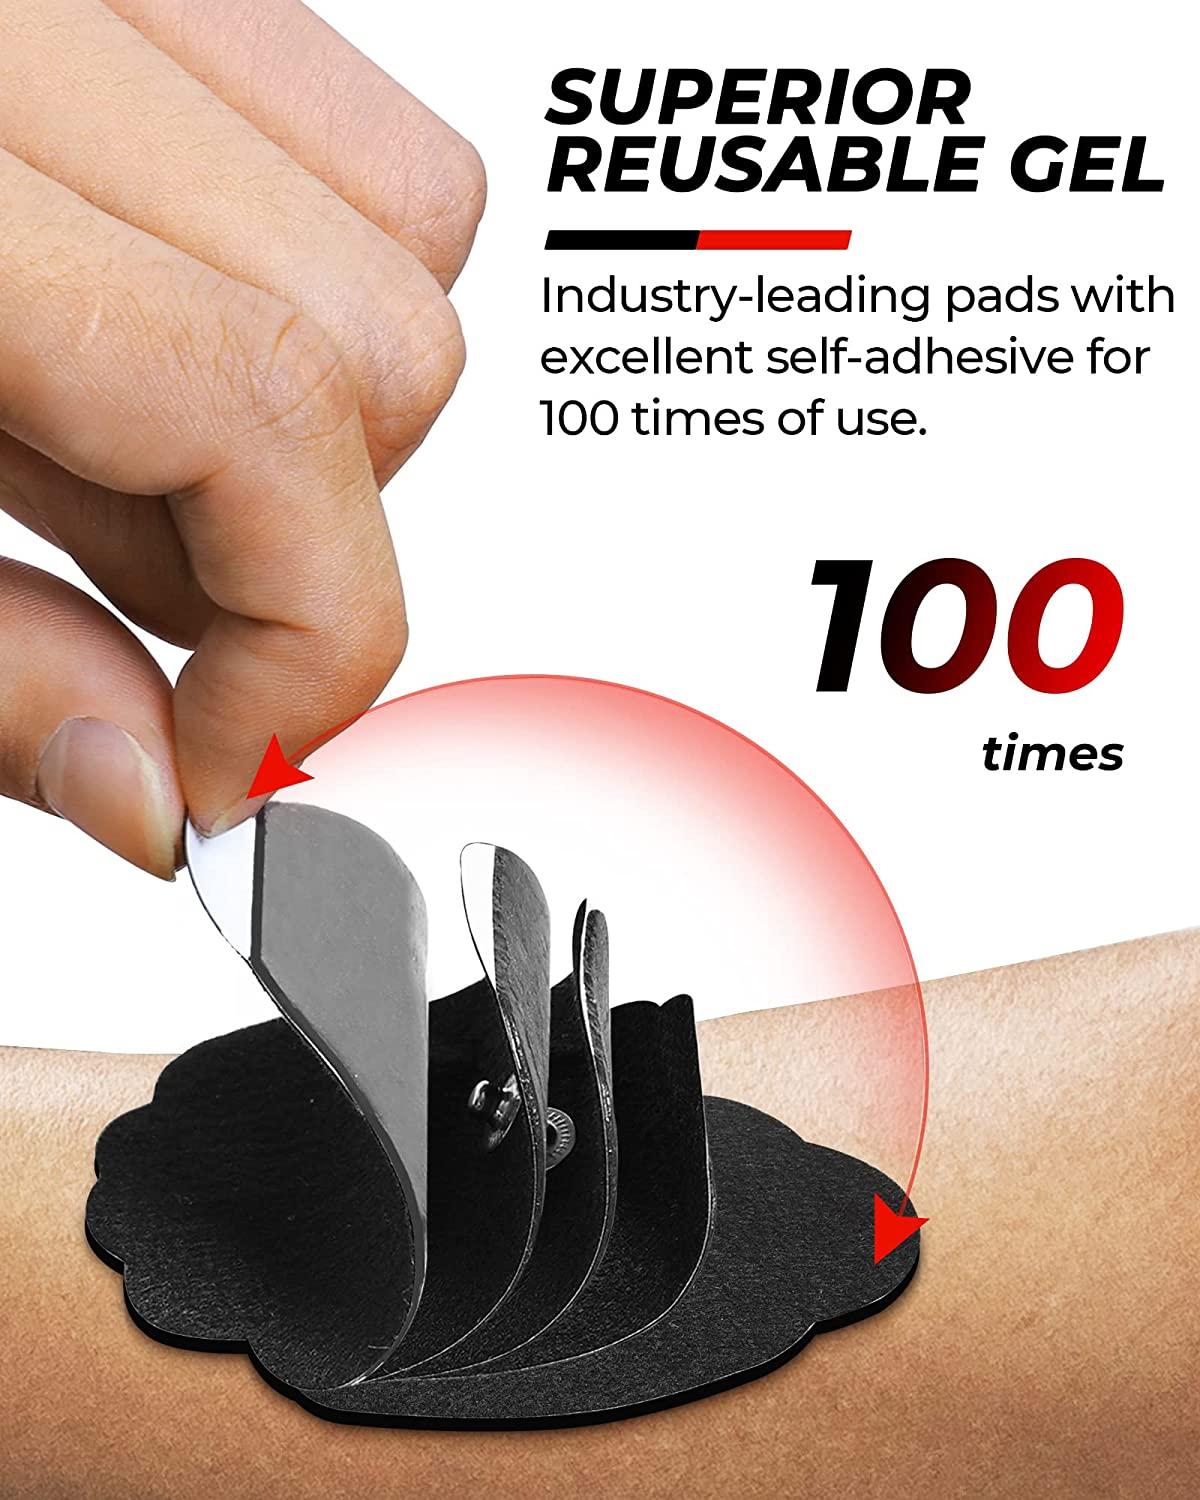 TENS Unit Muscle Stimulator Electric Shock Therapy for Muscles Dual Channel  TENS EMS Unit Electronic…See more TENS Unit Muscle Stimulator Electric